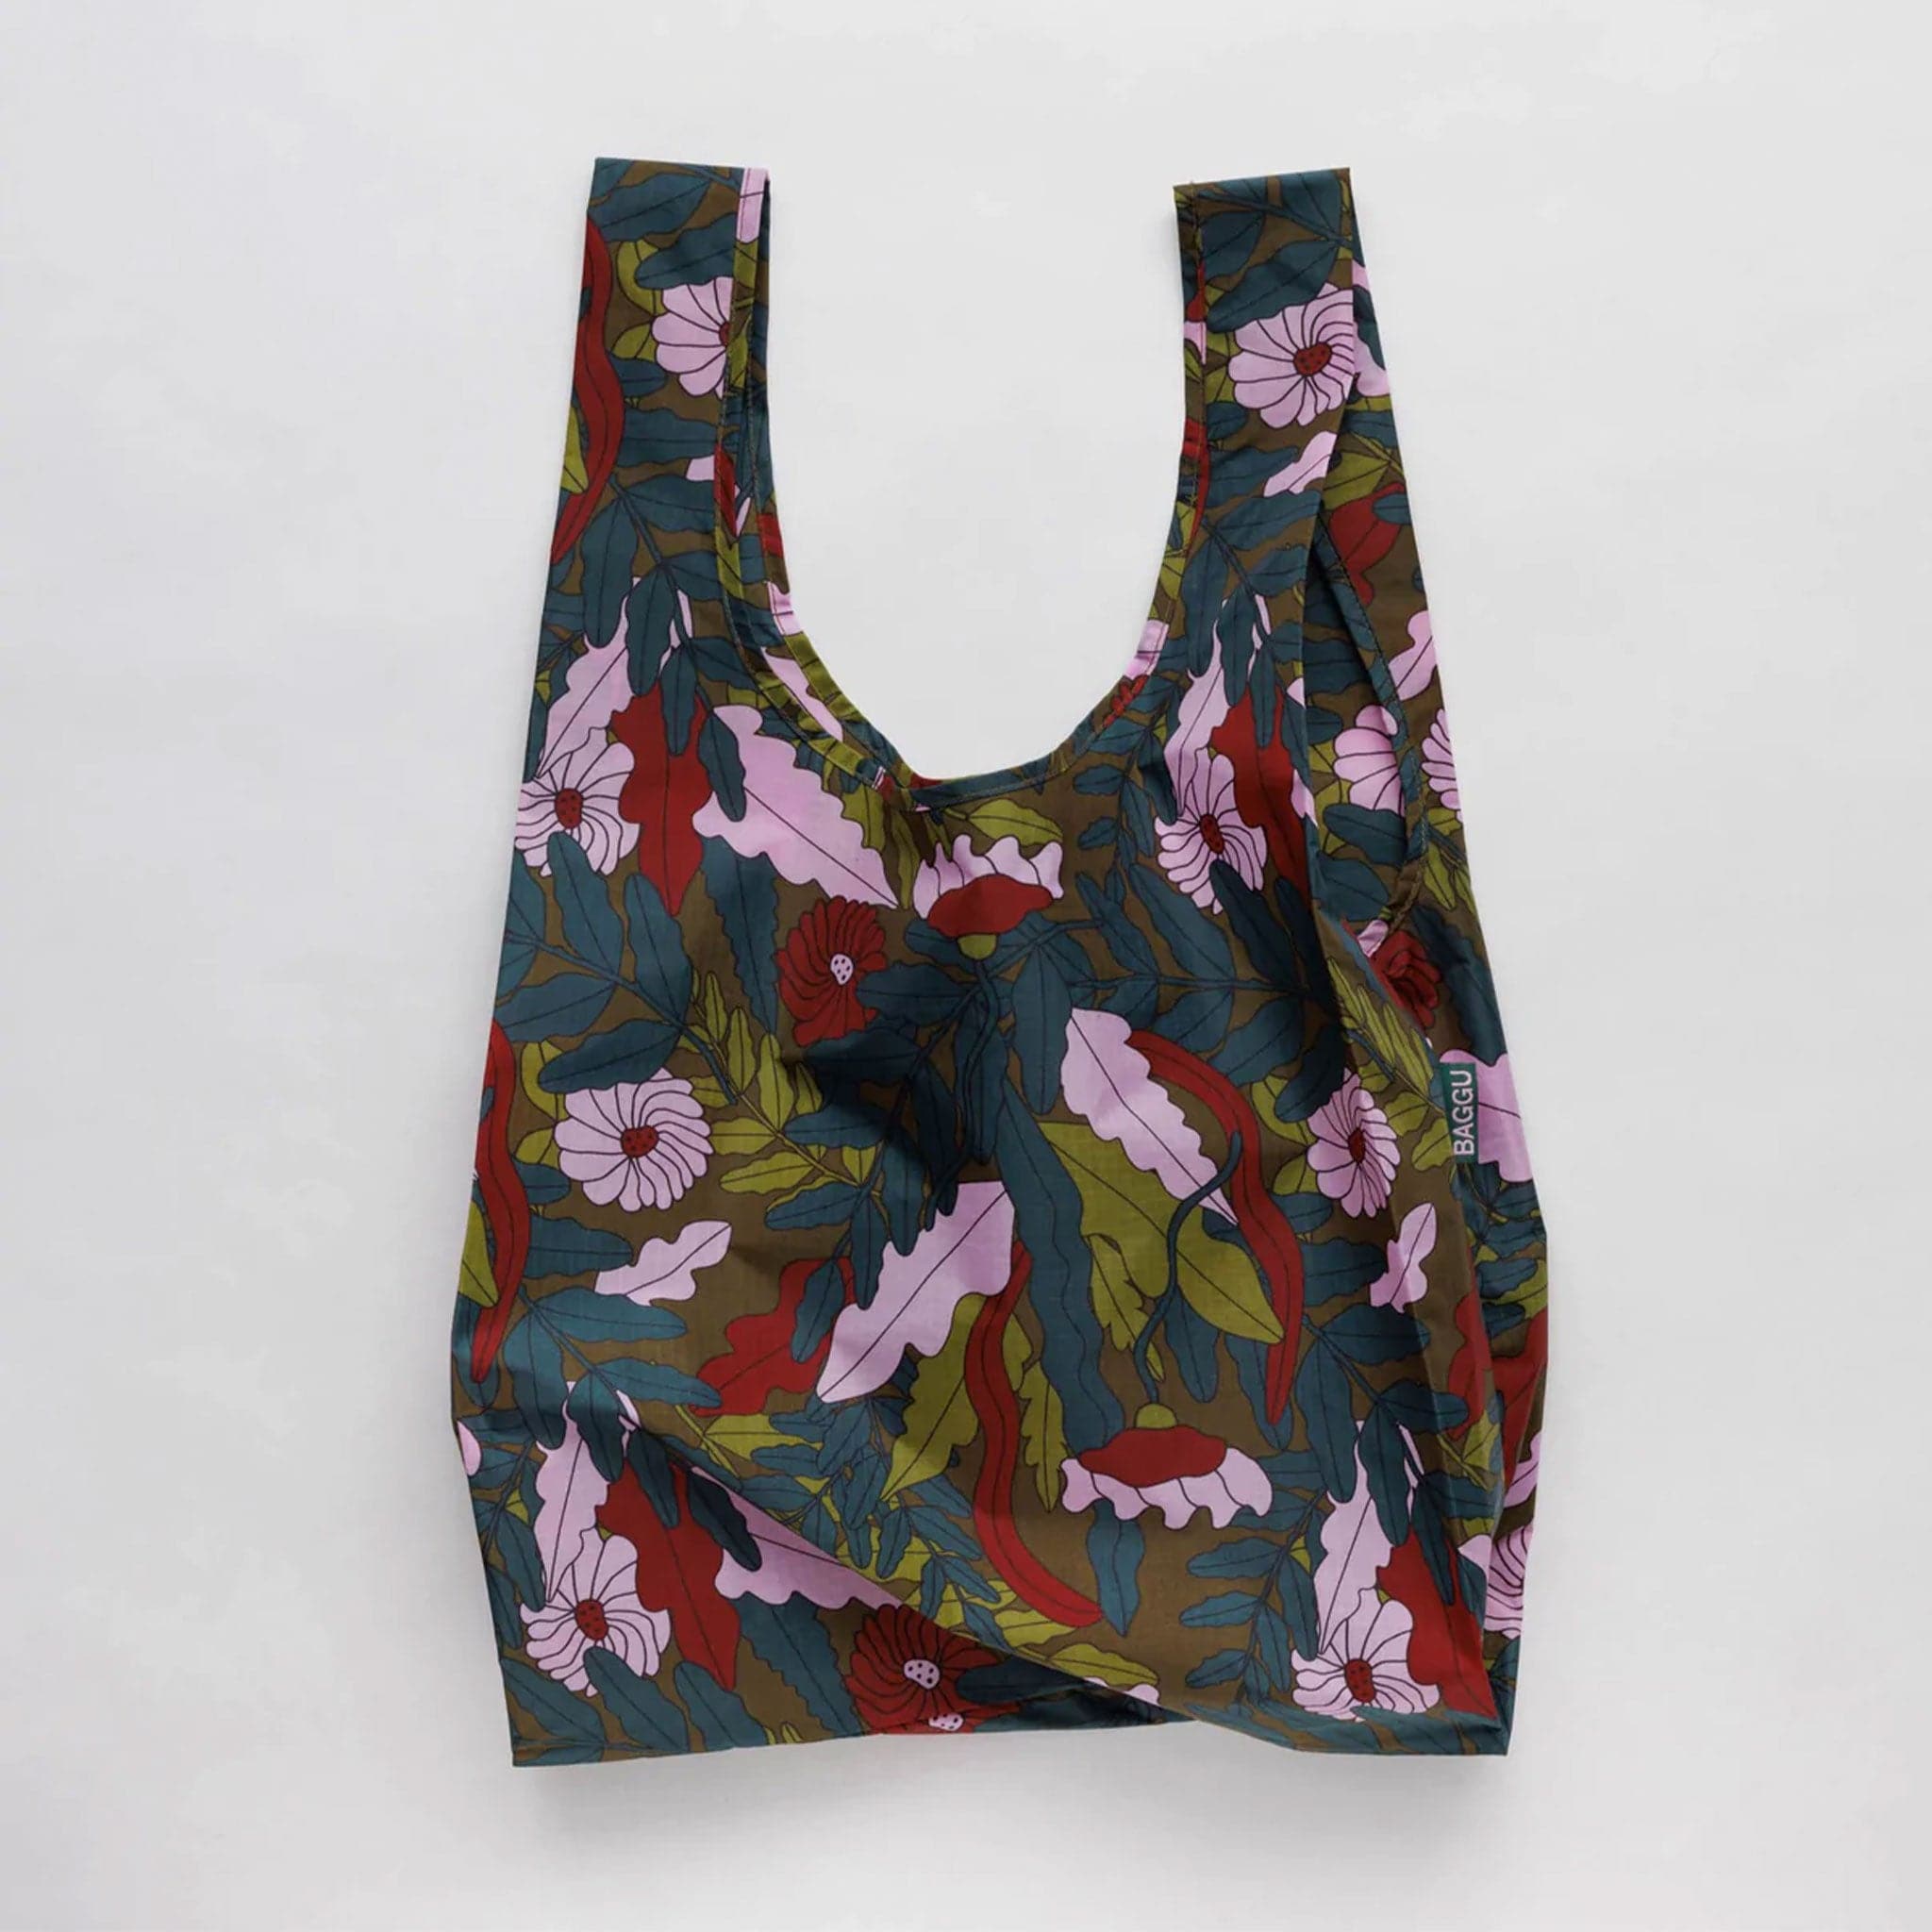 A dark green bag with leaves and flowers that range from lavender tones to dark reds and greens.